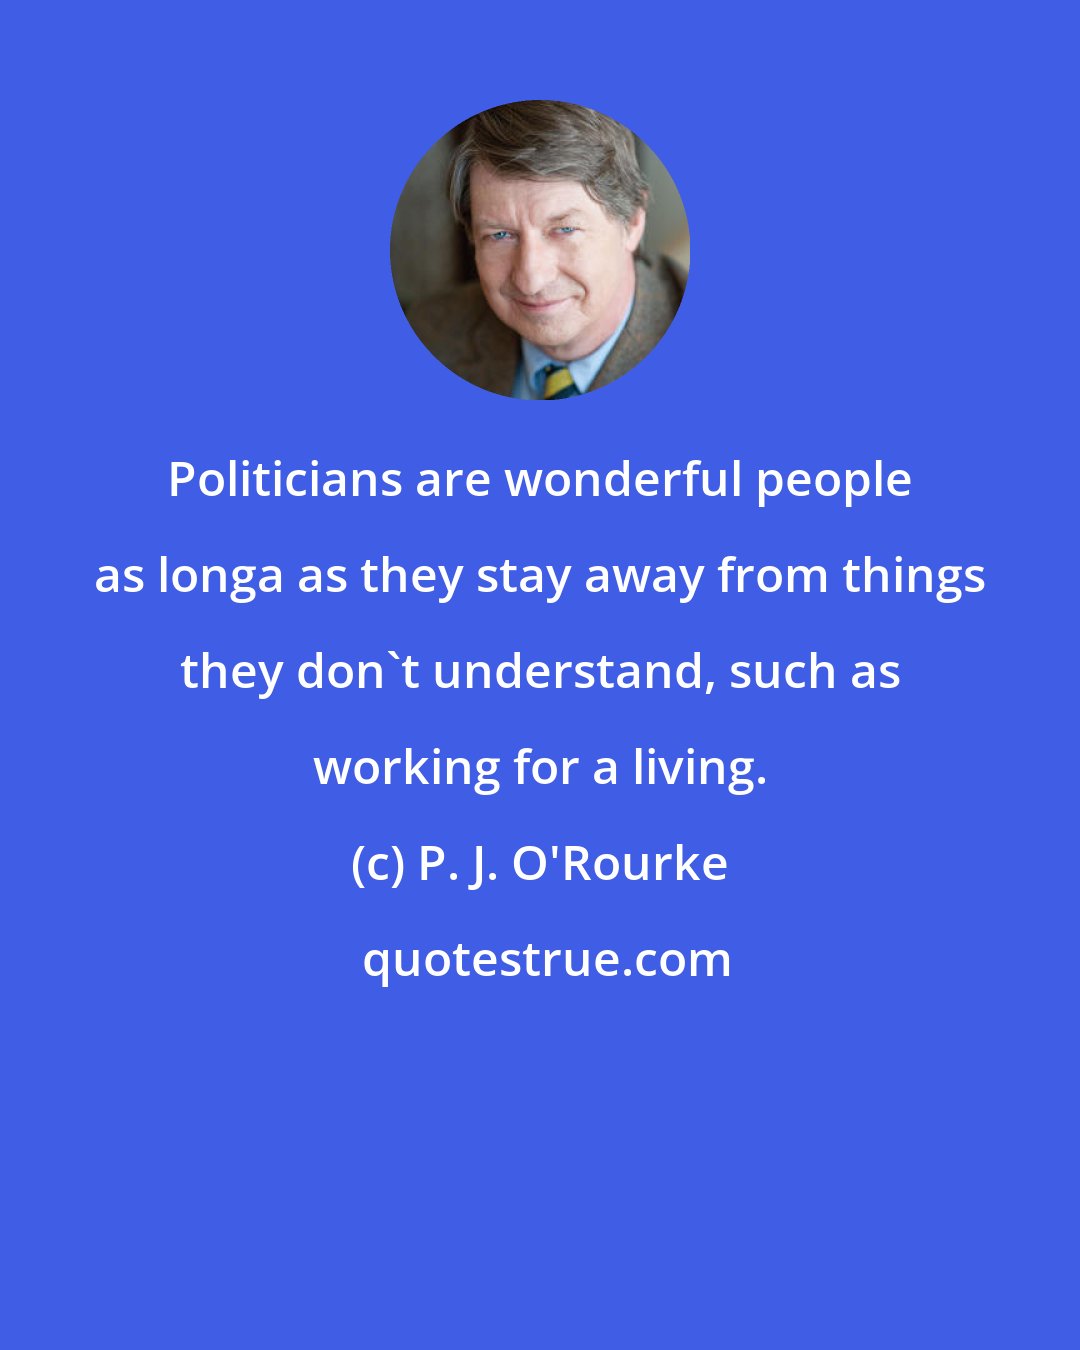 P. J. O'Rourke: Politicians are wonderful people as longa as they stay away from things they don't understand, such as working for a living.